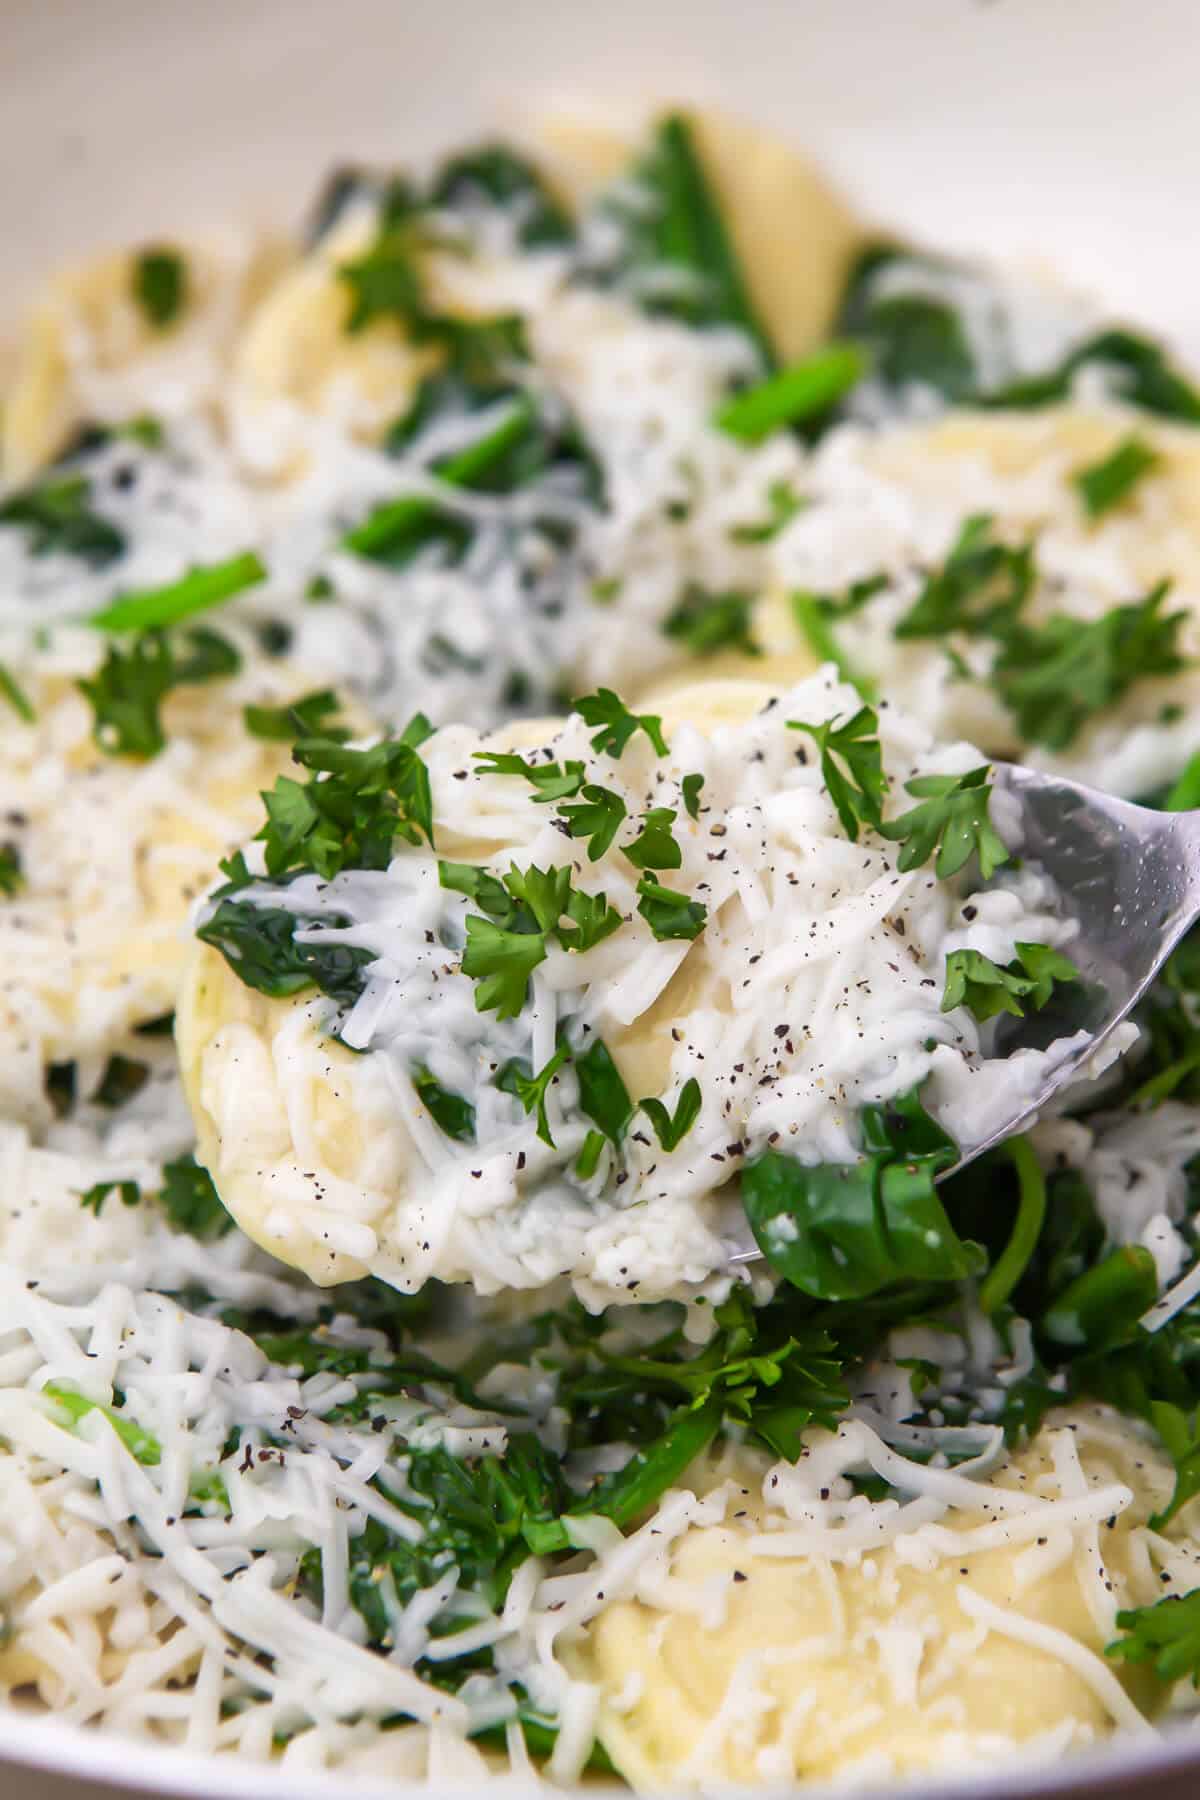 A frying pan full of dairy free perogies topped with vegan cheese and sprinkled with parsley being scooped up in a spoon.